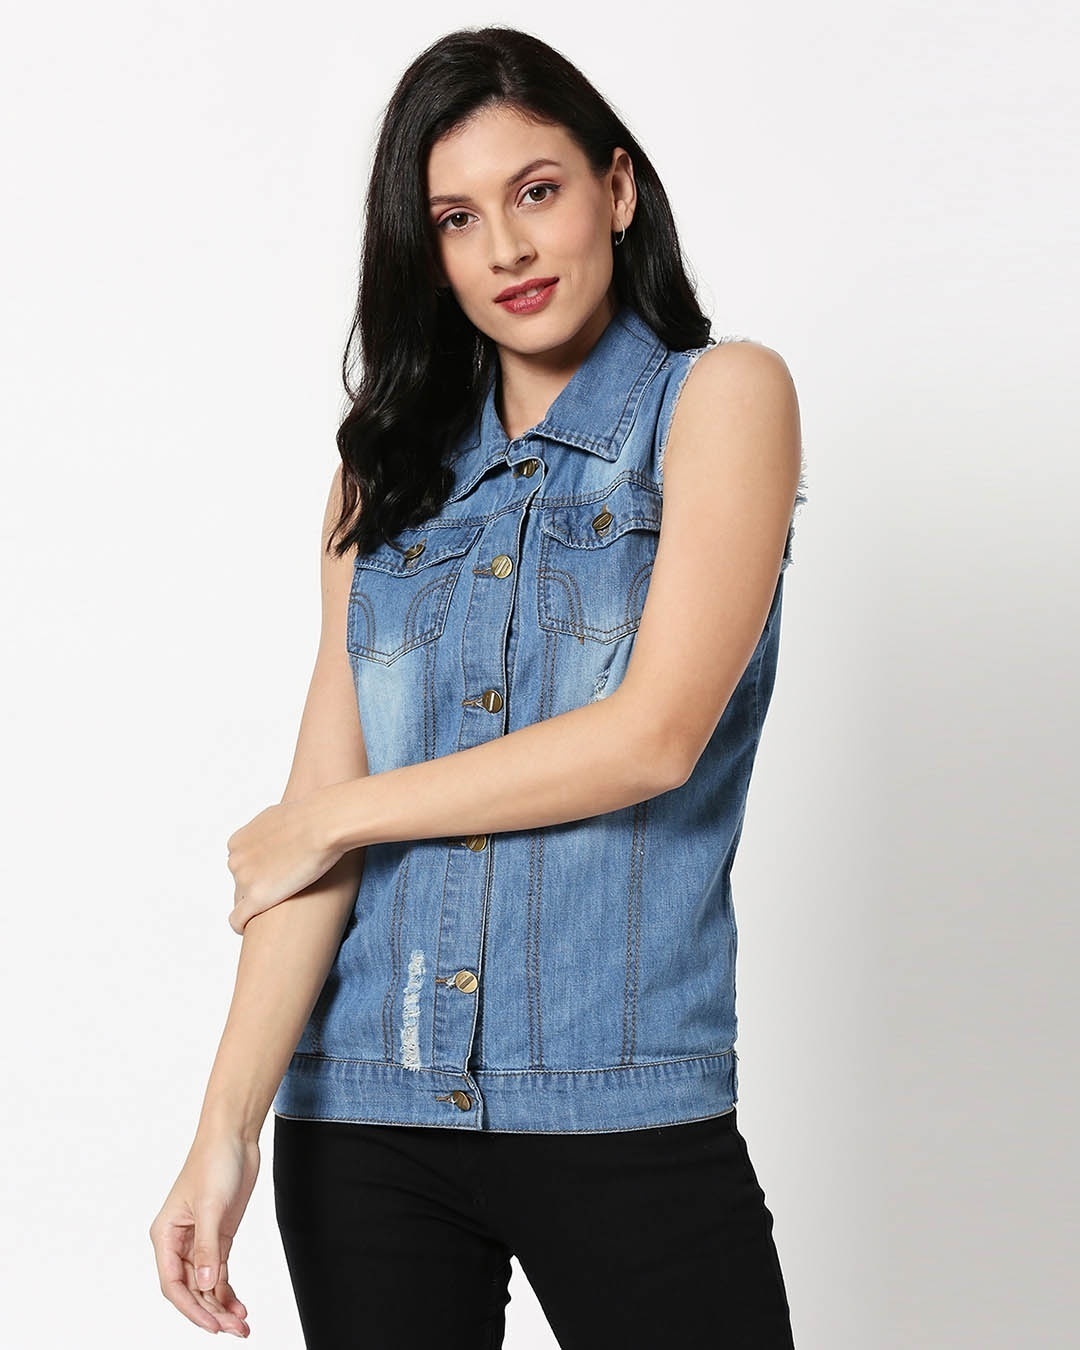 Fashionable Women Clothing OEM/ODM Sleeveless Fringe Cuff Denim Jacket with  Active Enzyme Washing Embroidery Blocking at Back Denim Vest - China  Bootcut Pants and Women Denim Jeans price | Made-in-China.com